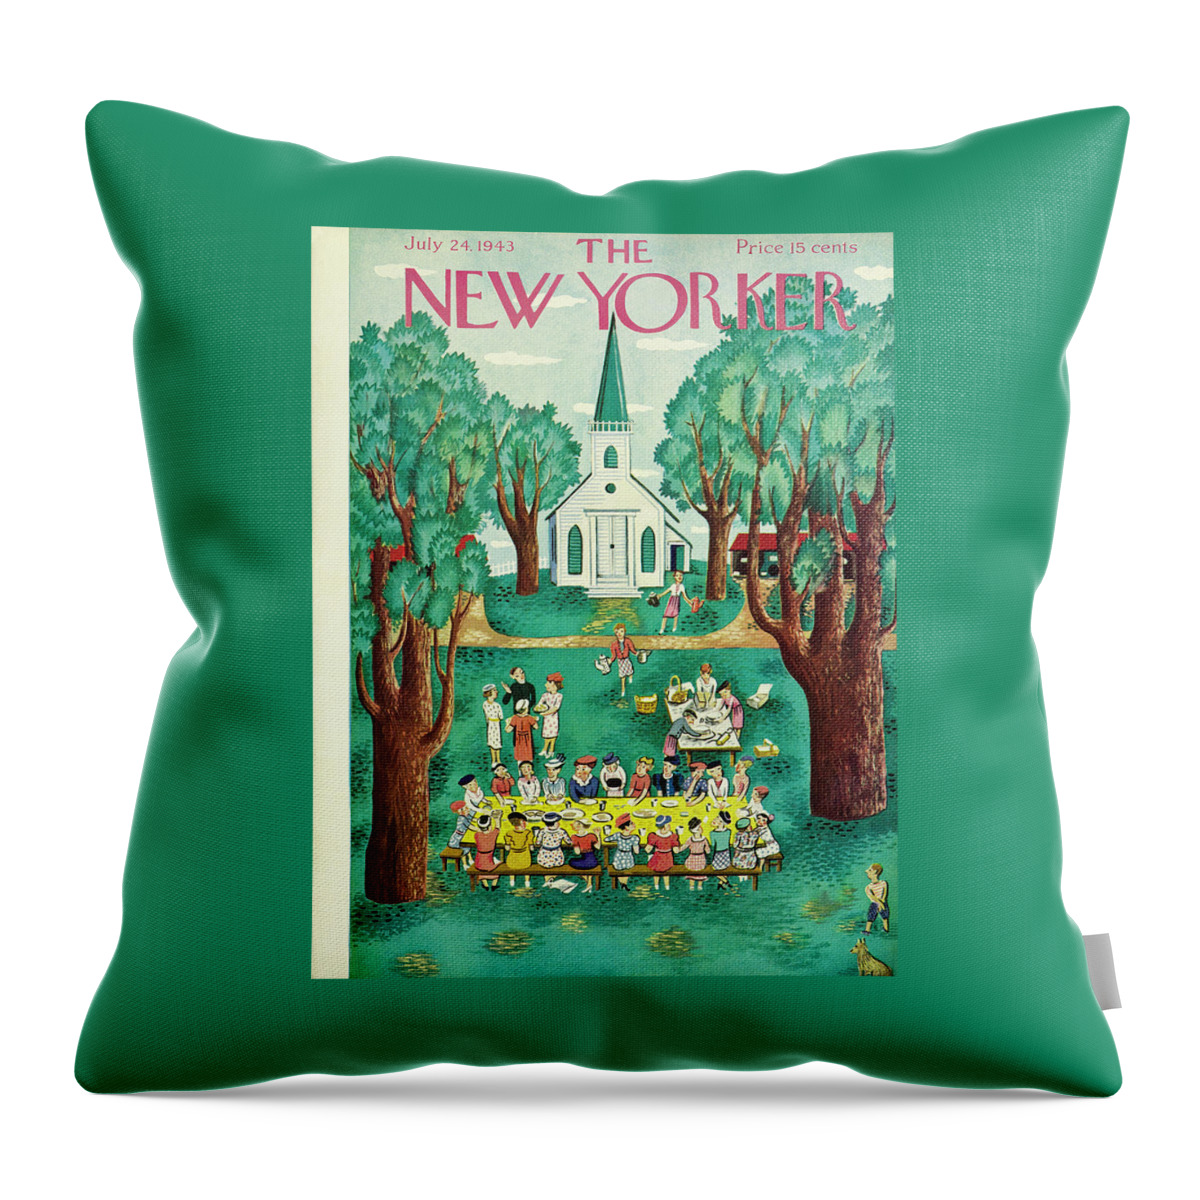 New Yorker July 24 1943 Throw Pillow